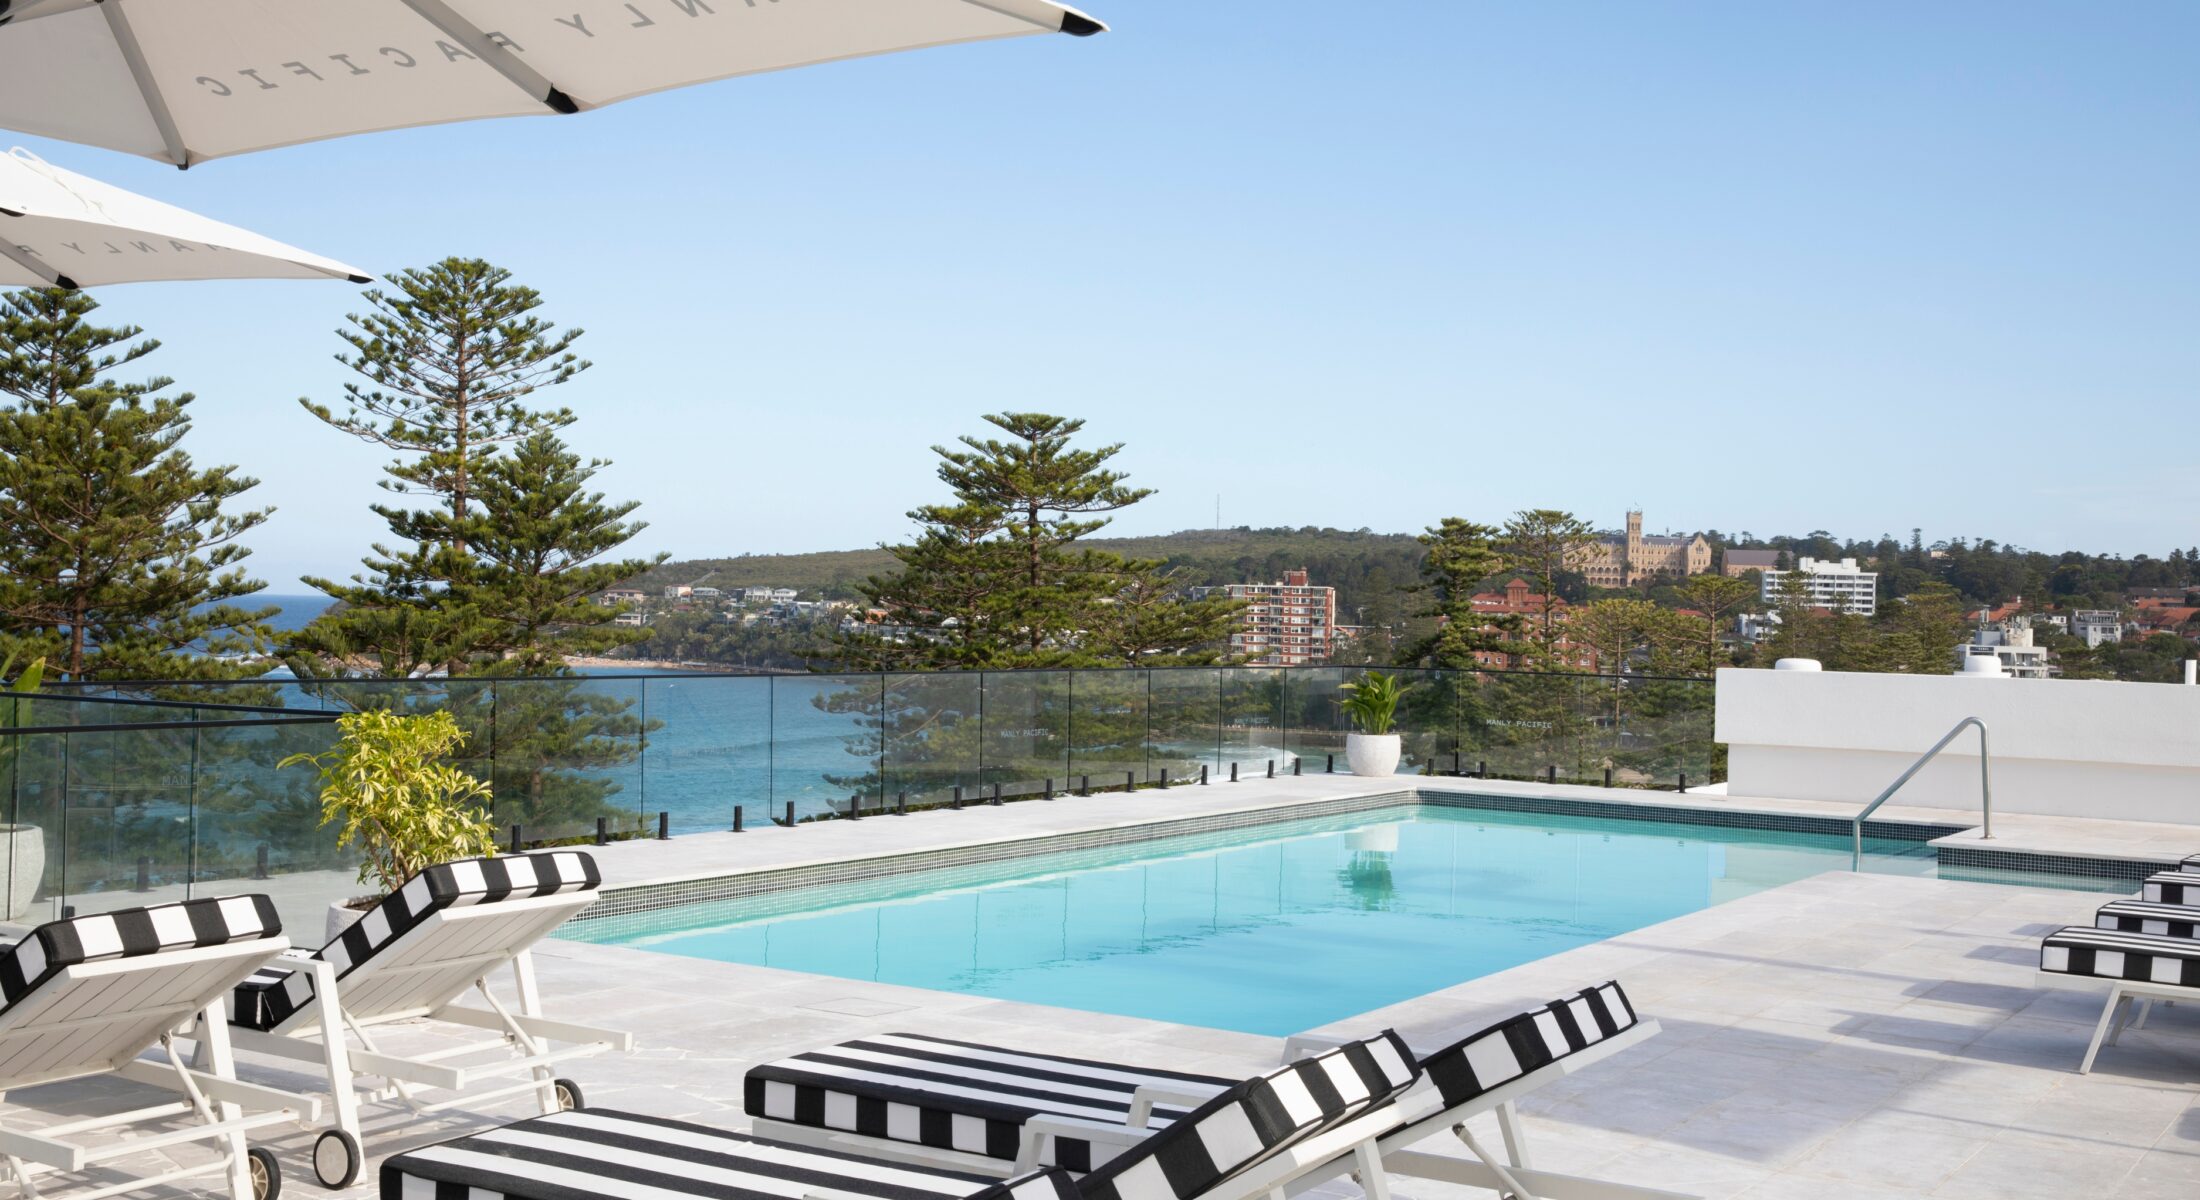 Rooftop pool at Manly Pacific Hotel, overlooking Manly Beach